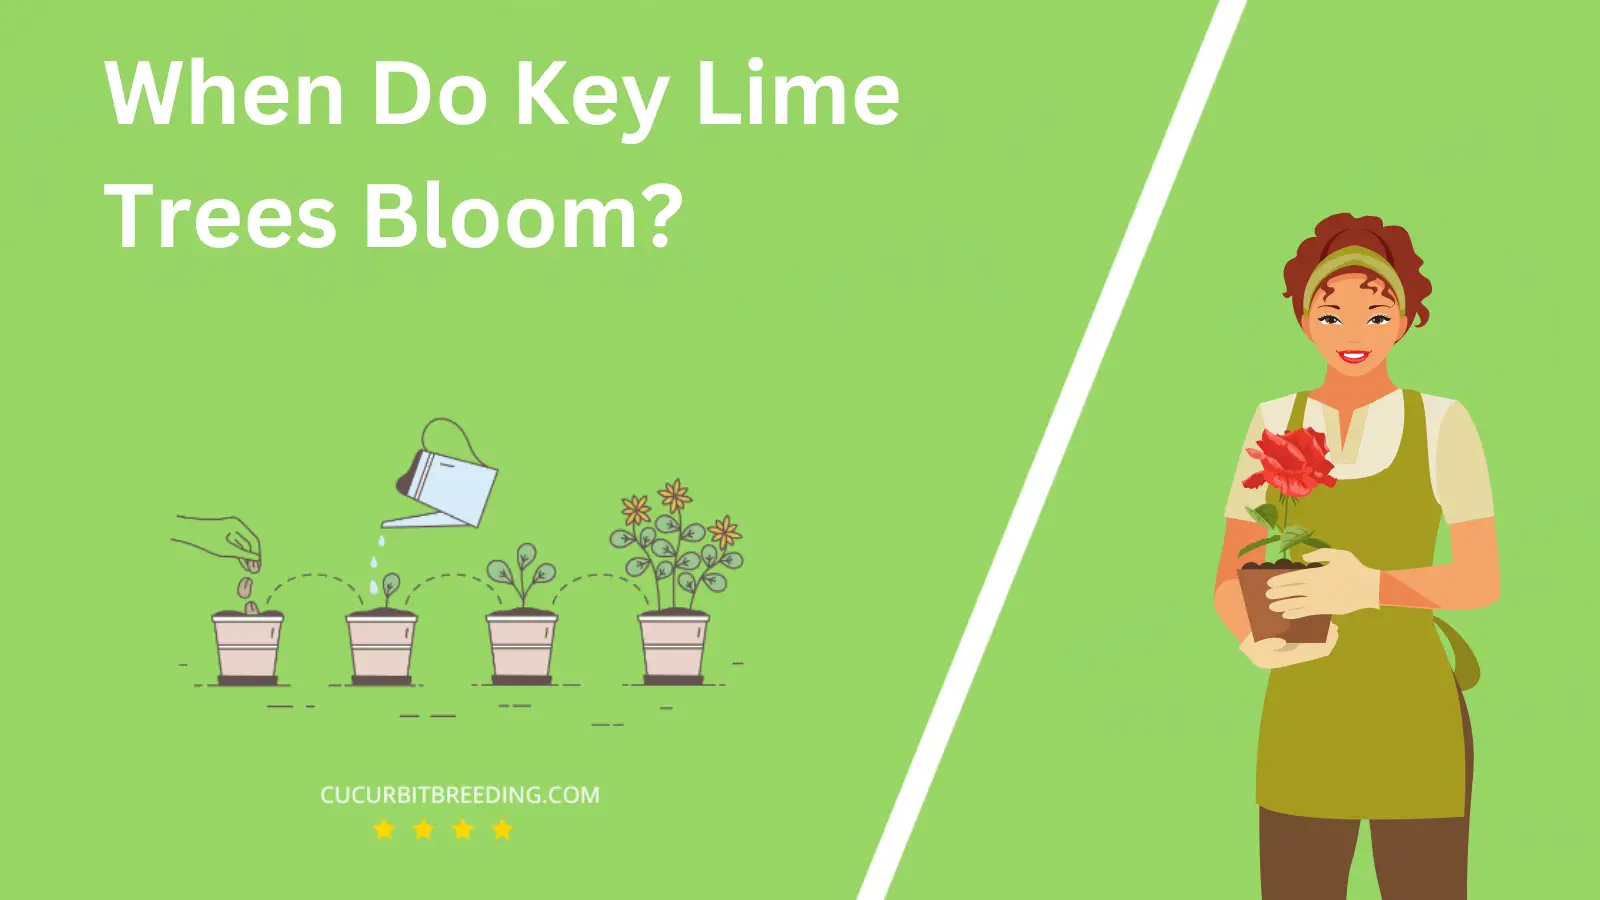 When Do Key Lime Trees Bloom?